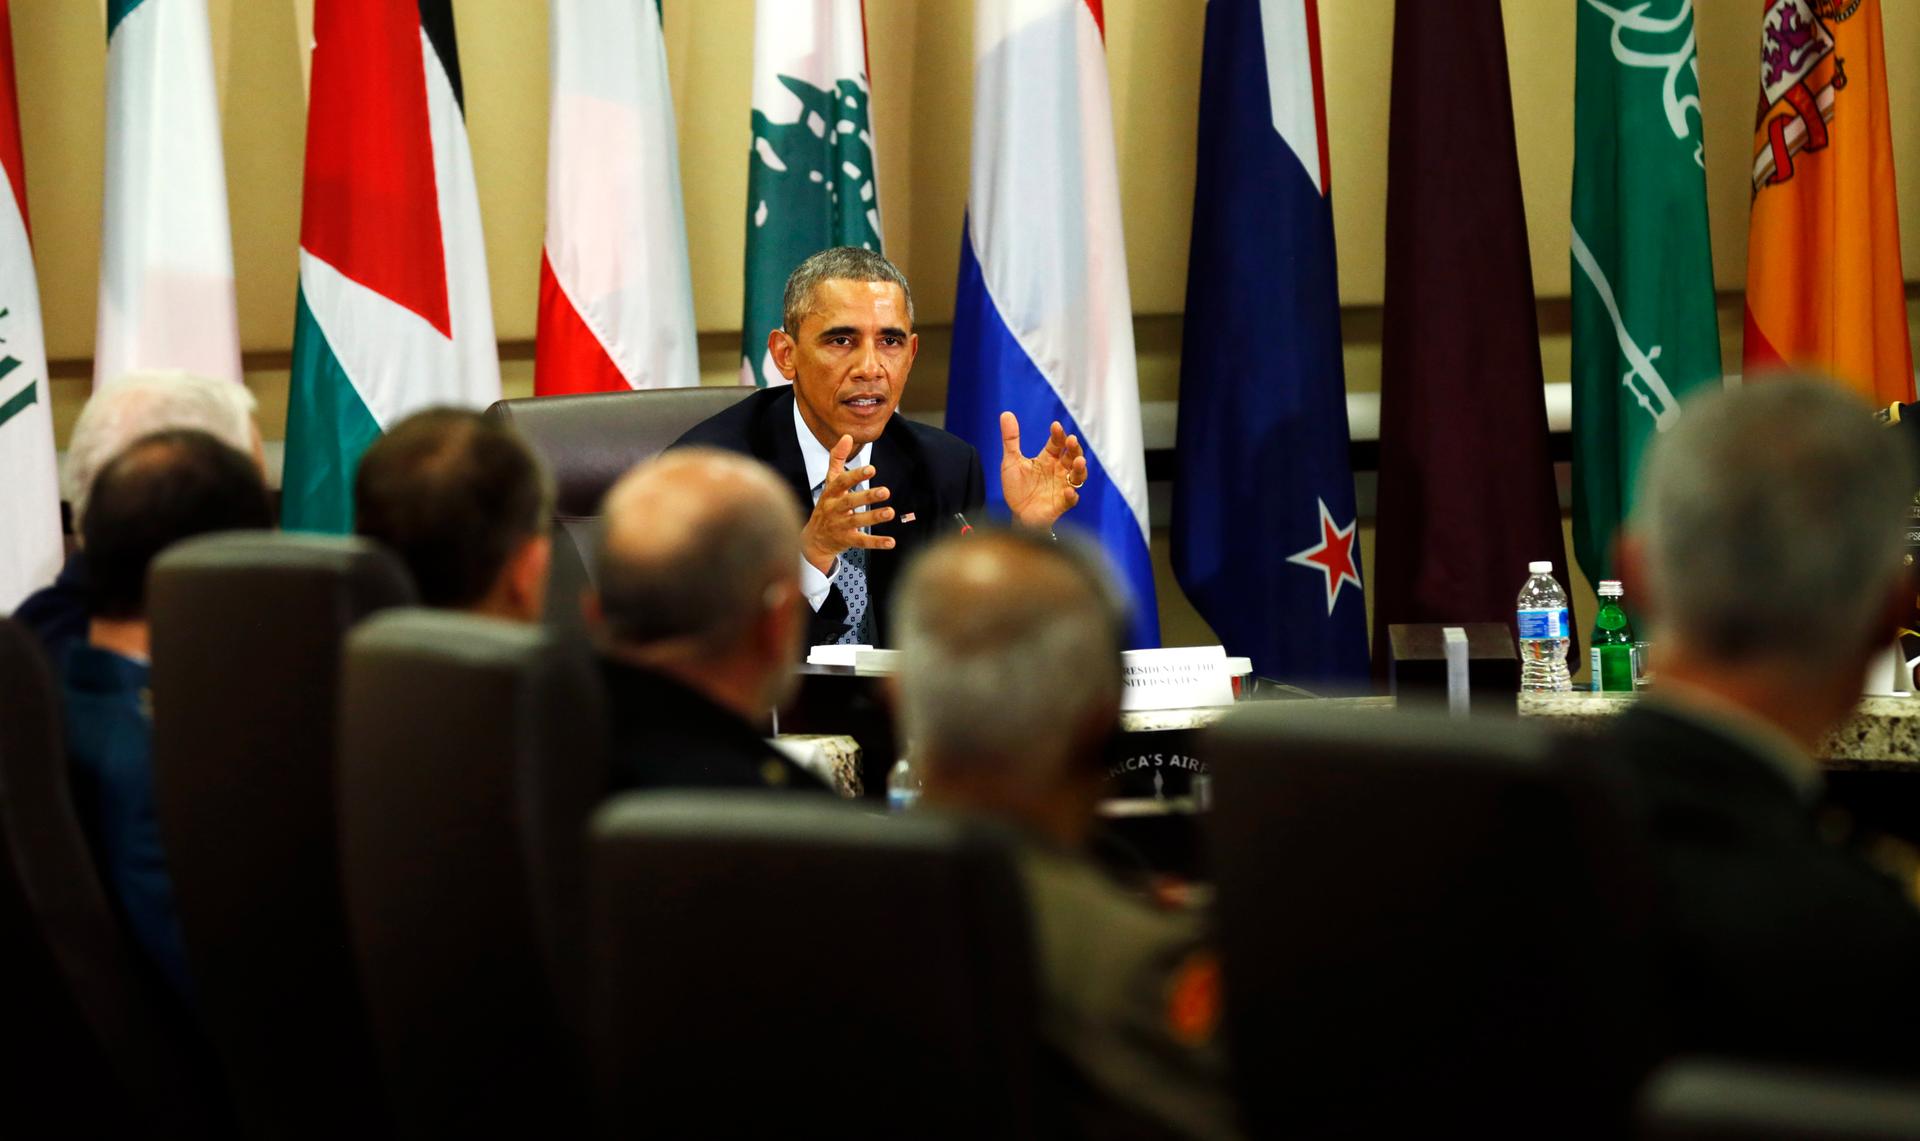 US President Barack Obama speaks at a meeting with more than 20 foreign defense chiefs to discuss the coalition efforts in the ongoing campaign against ISIS at Joint Base Andrews in Washington on October 14, 2014.